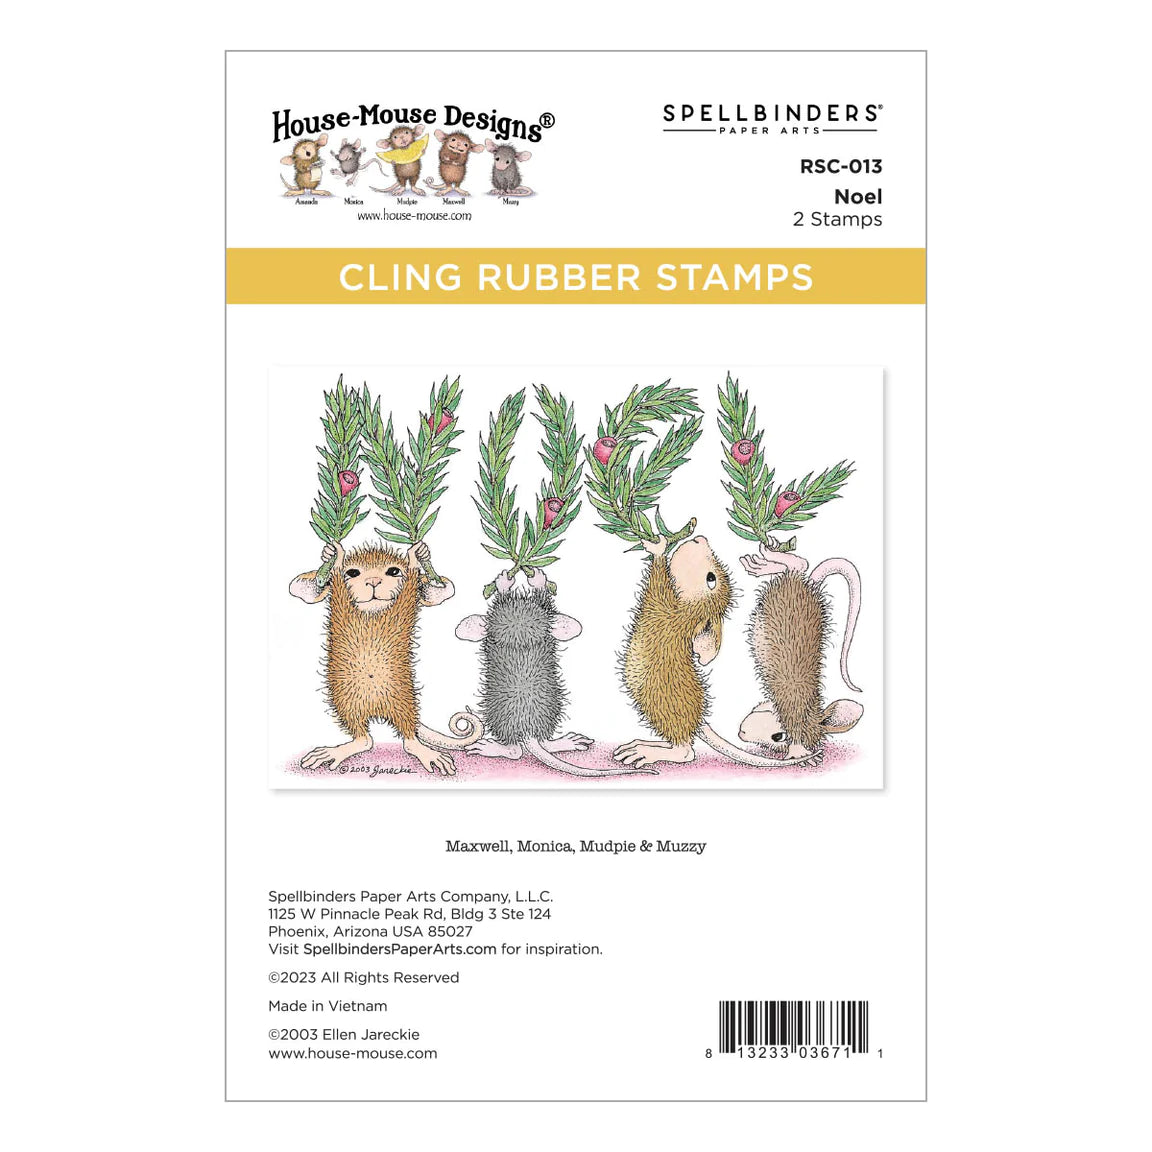 Spellbinders House Mouse Cling Rubber Stamp Noel - RSC-013